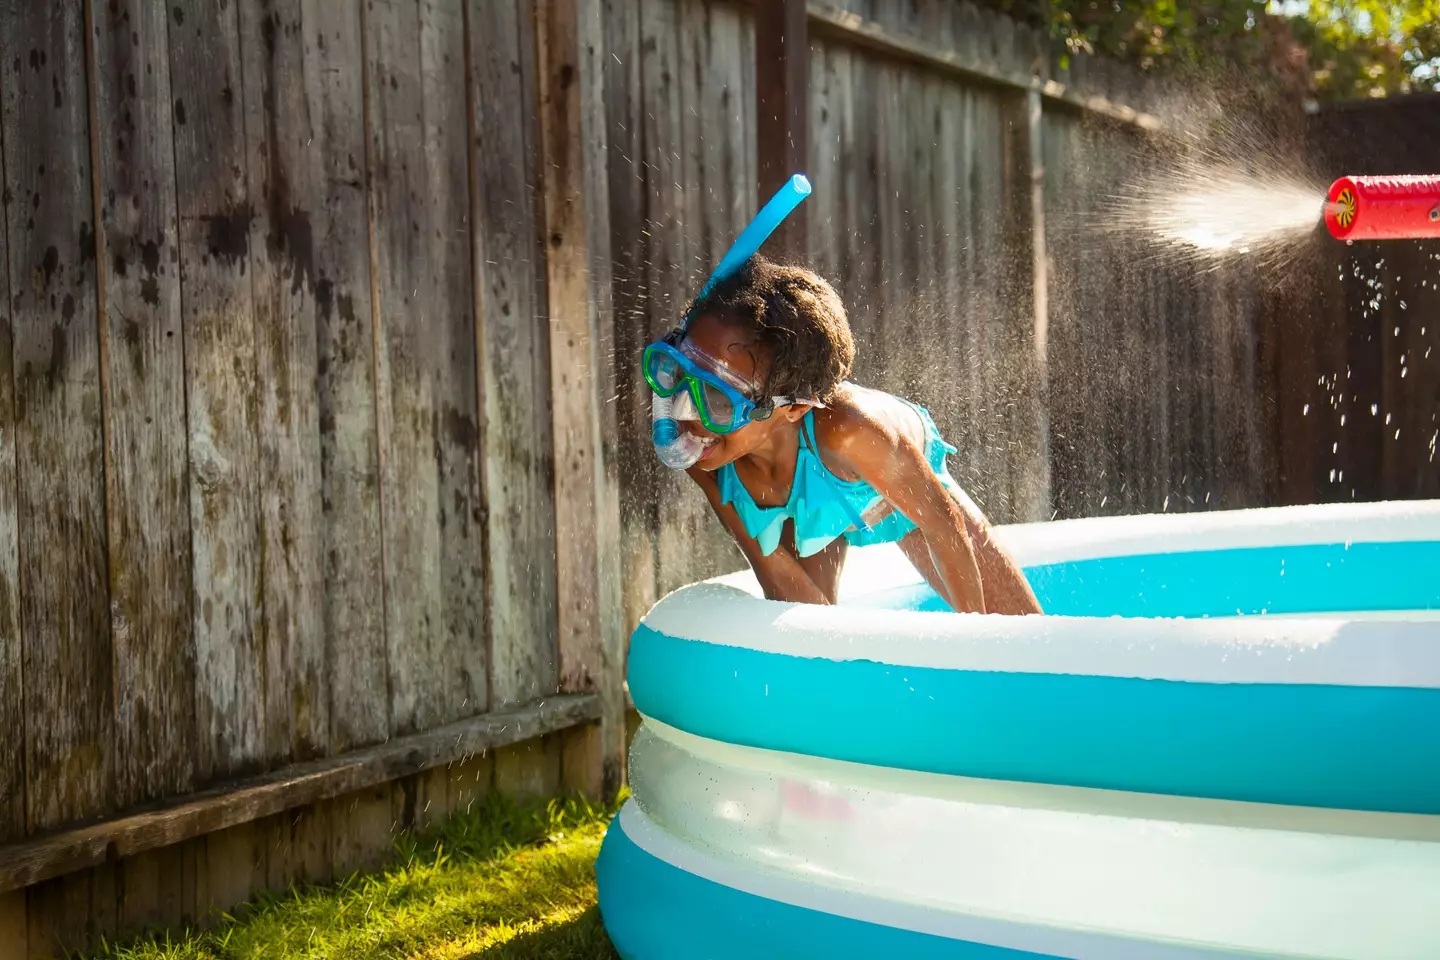 It's crucial that paddling pool water is emptied every day.